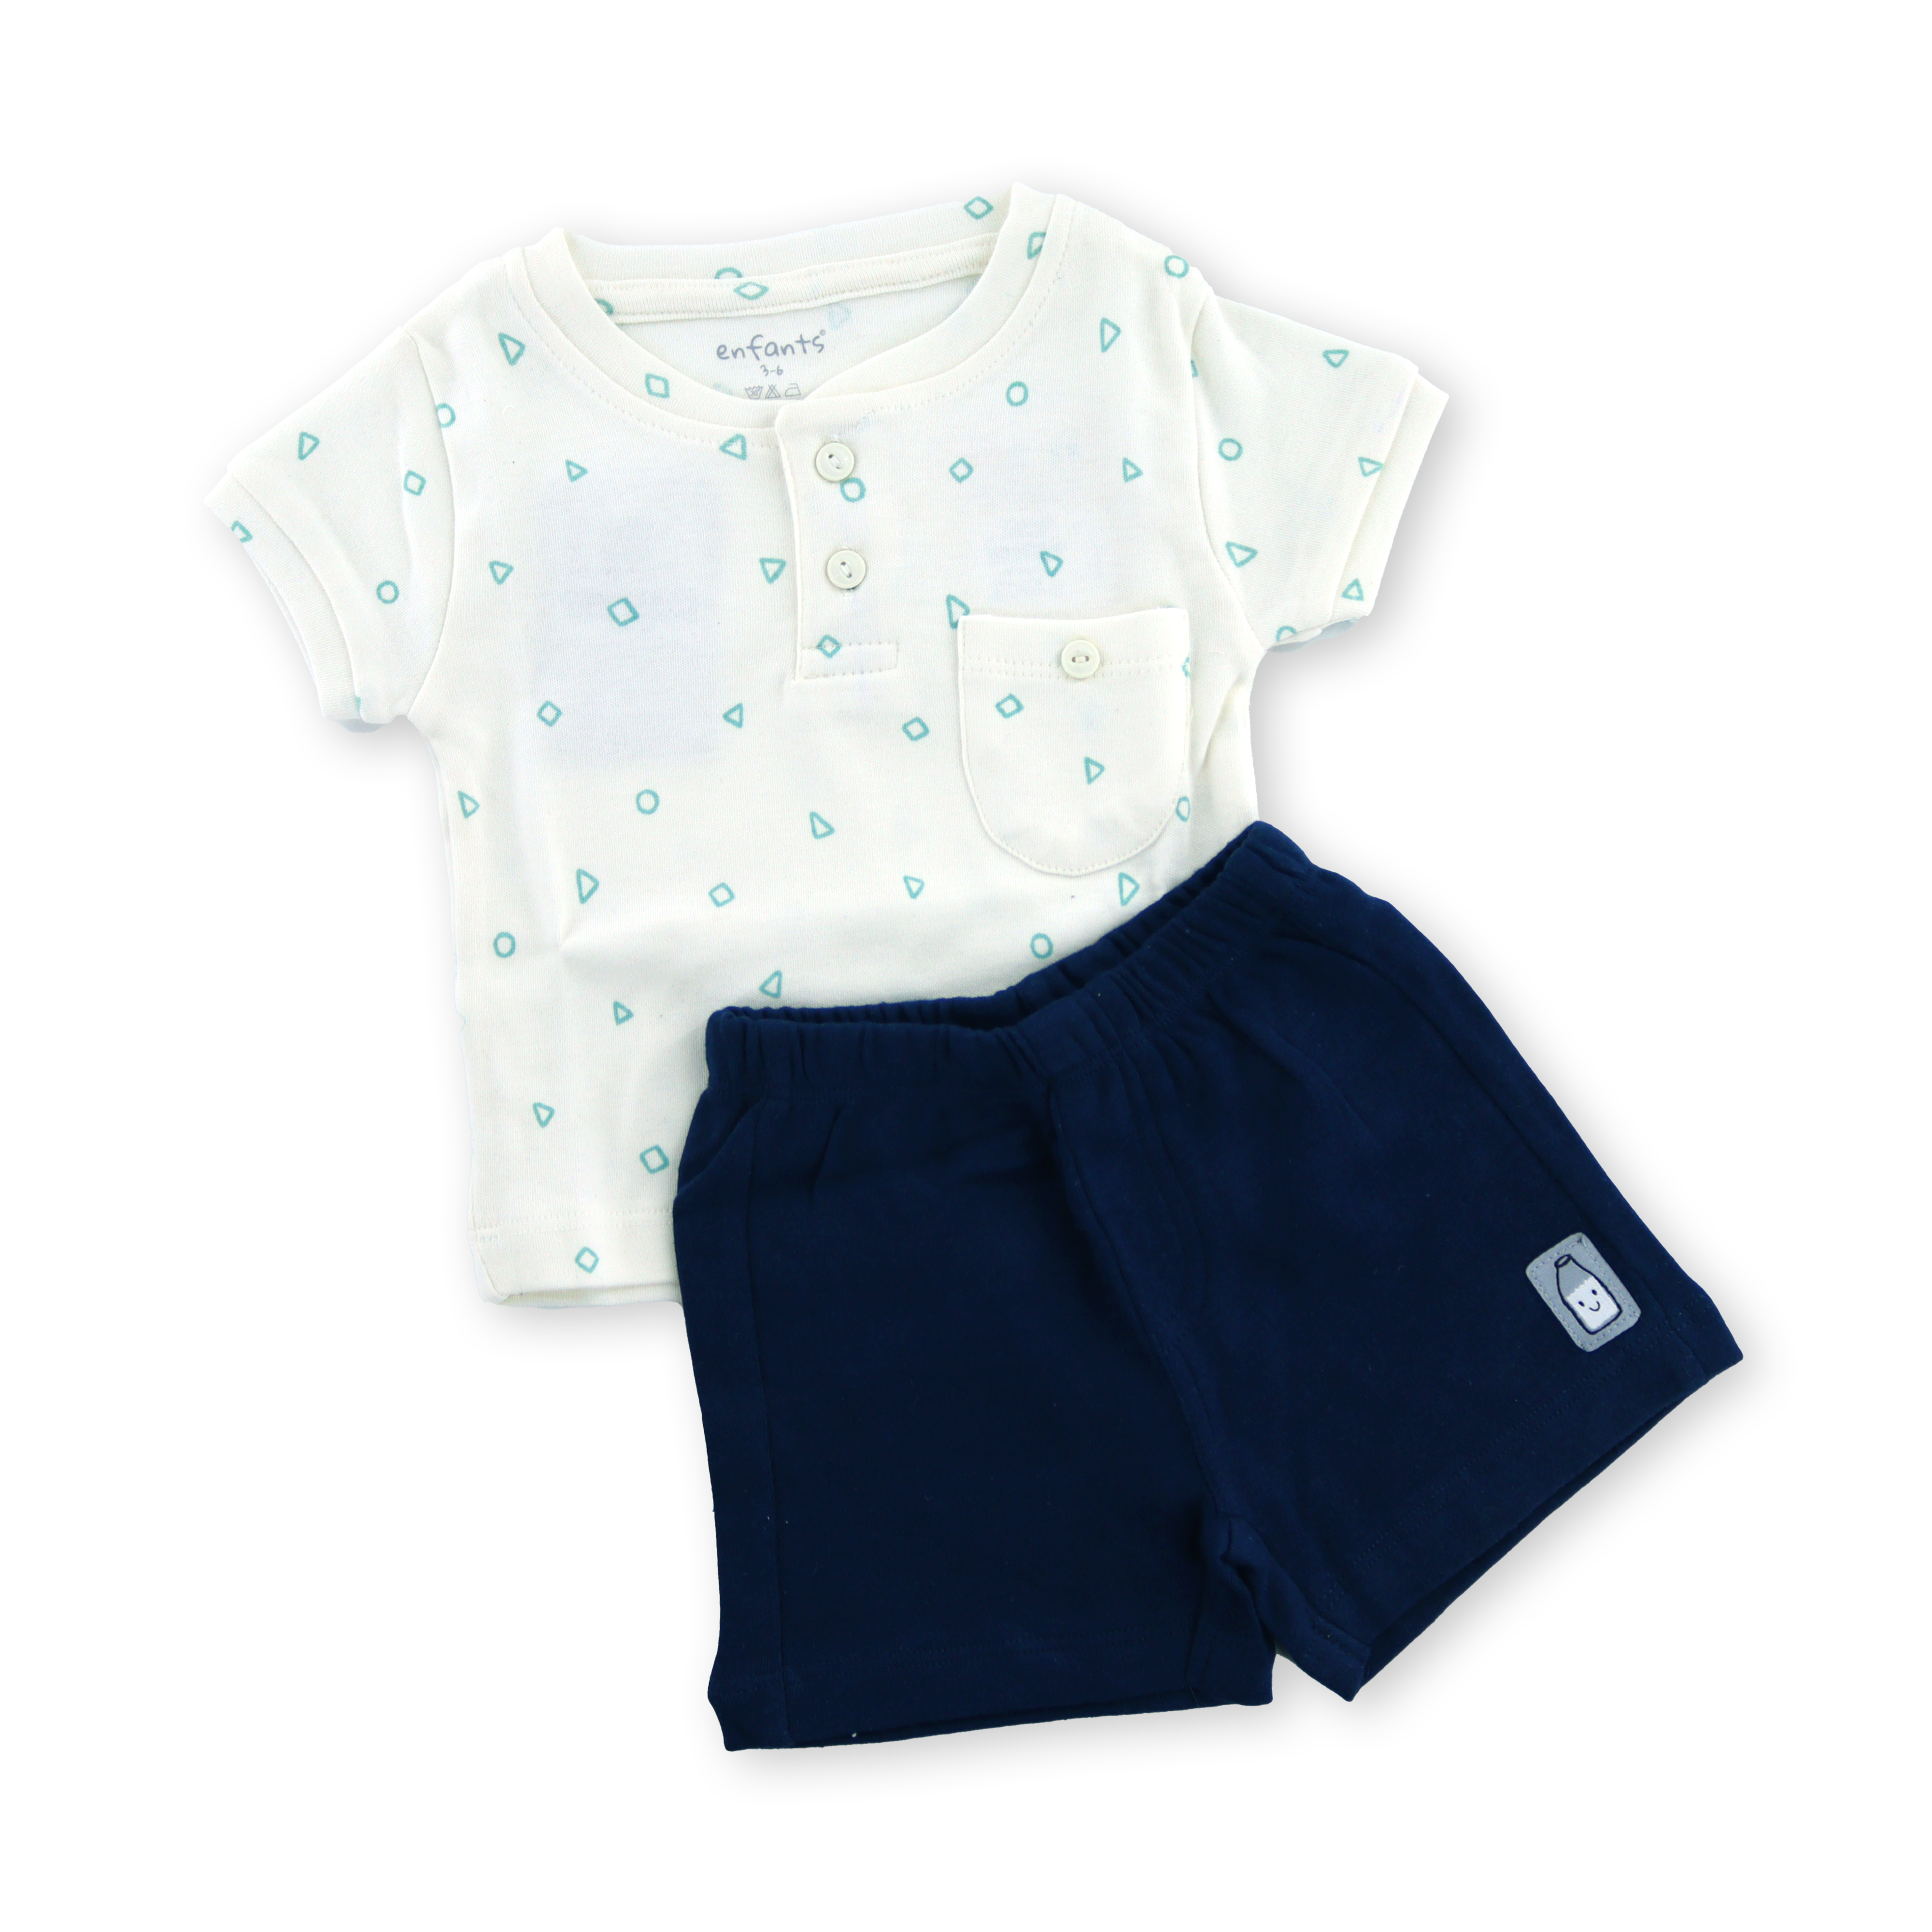 Infants Baby boys clothing sets | Cotton T-shirt with Shorts | Everyday wear soft cotton